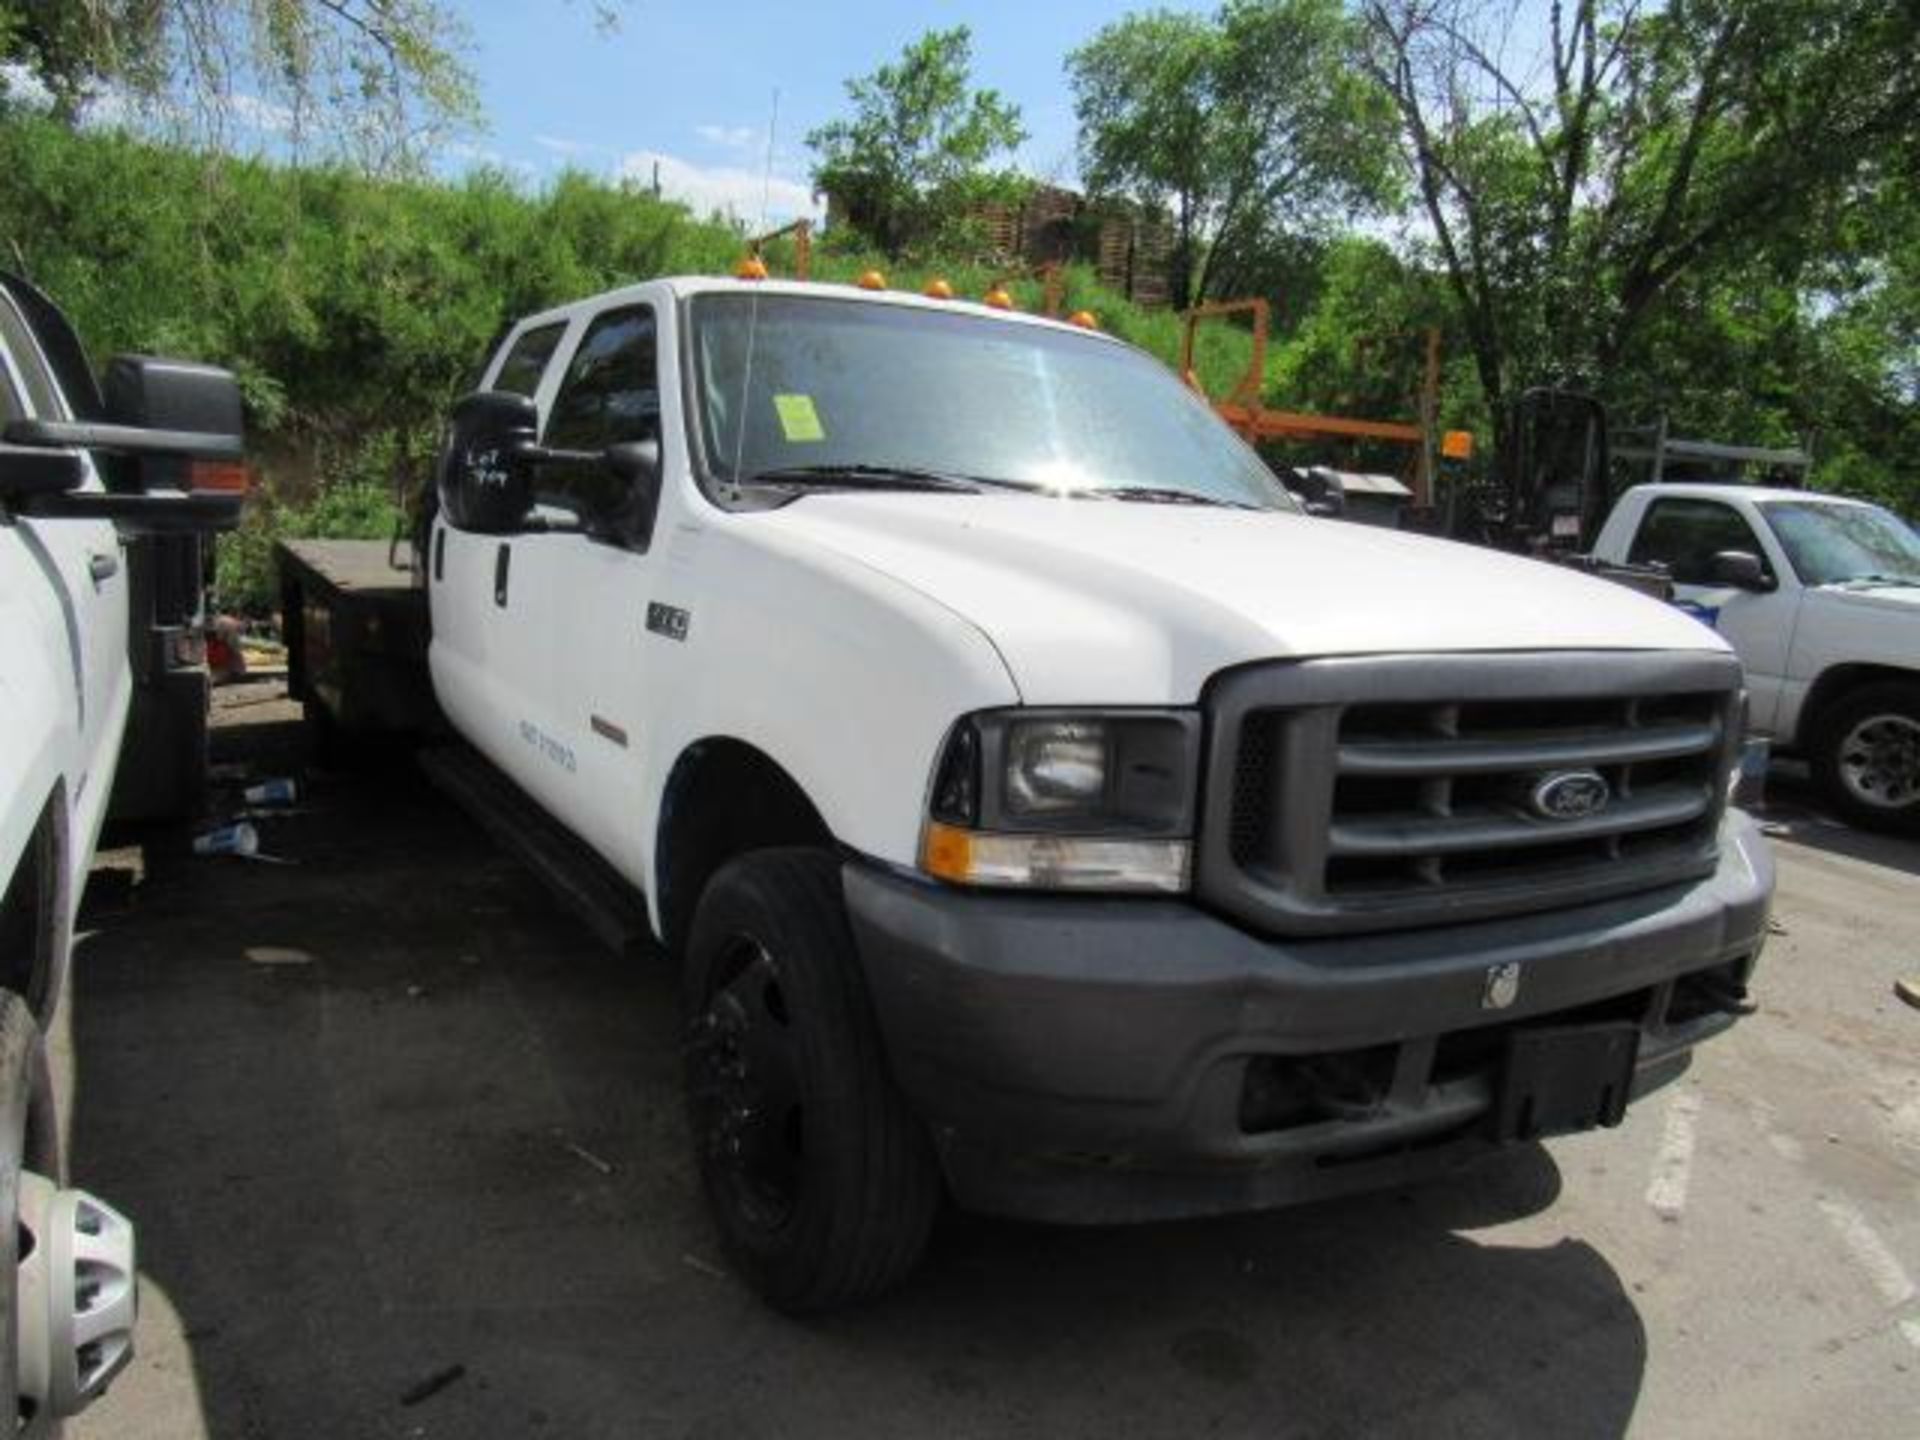 2004 Ford F550 11 ft. Flatbed Superduty 4 x 4, VIN # 1FDAW57PX4EB03420, Crew Cab, Goose Neck - Image 3 of 9